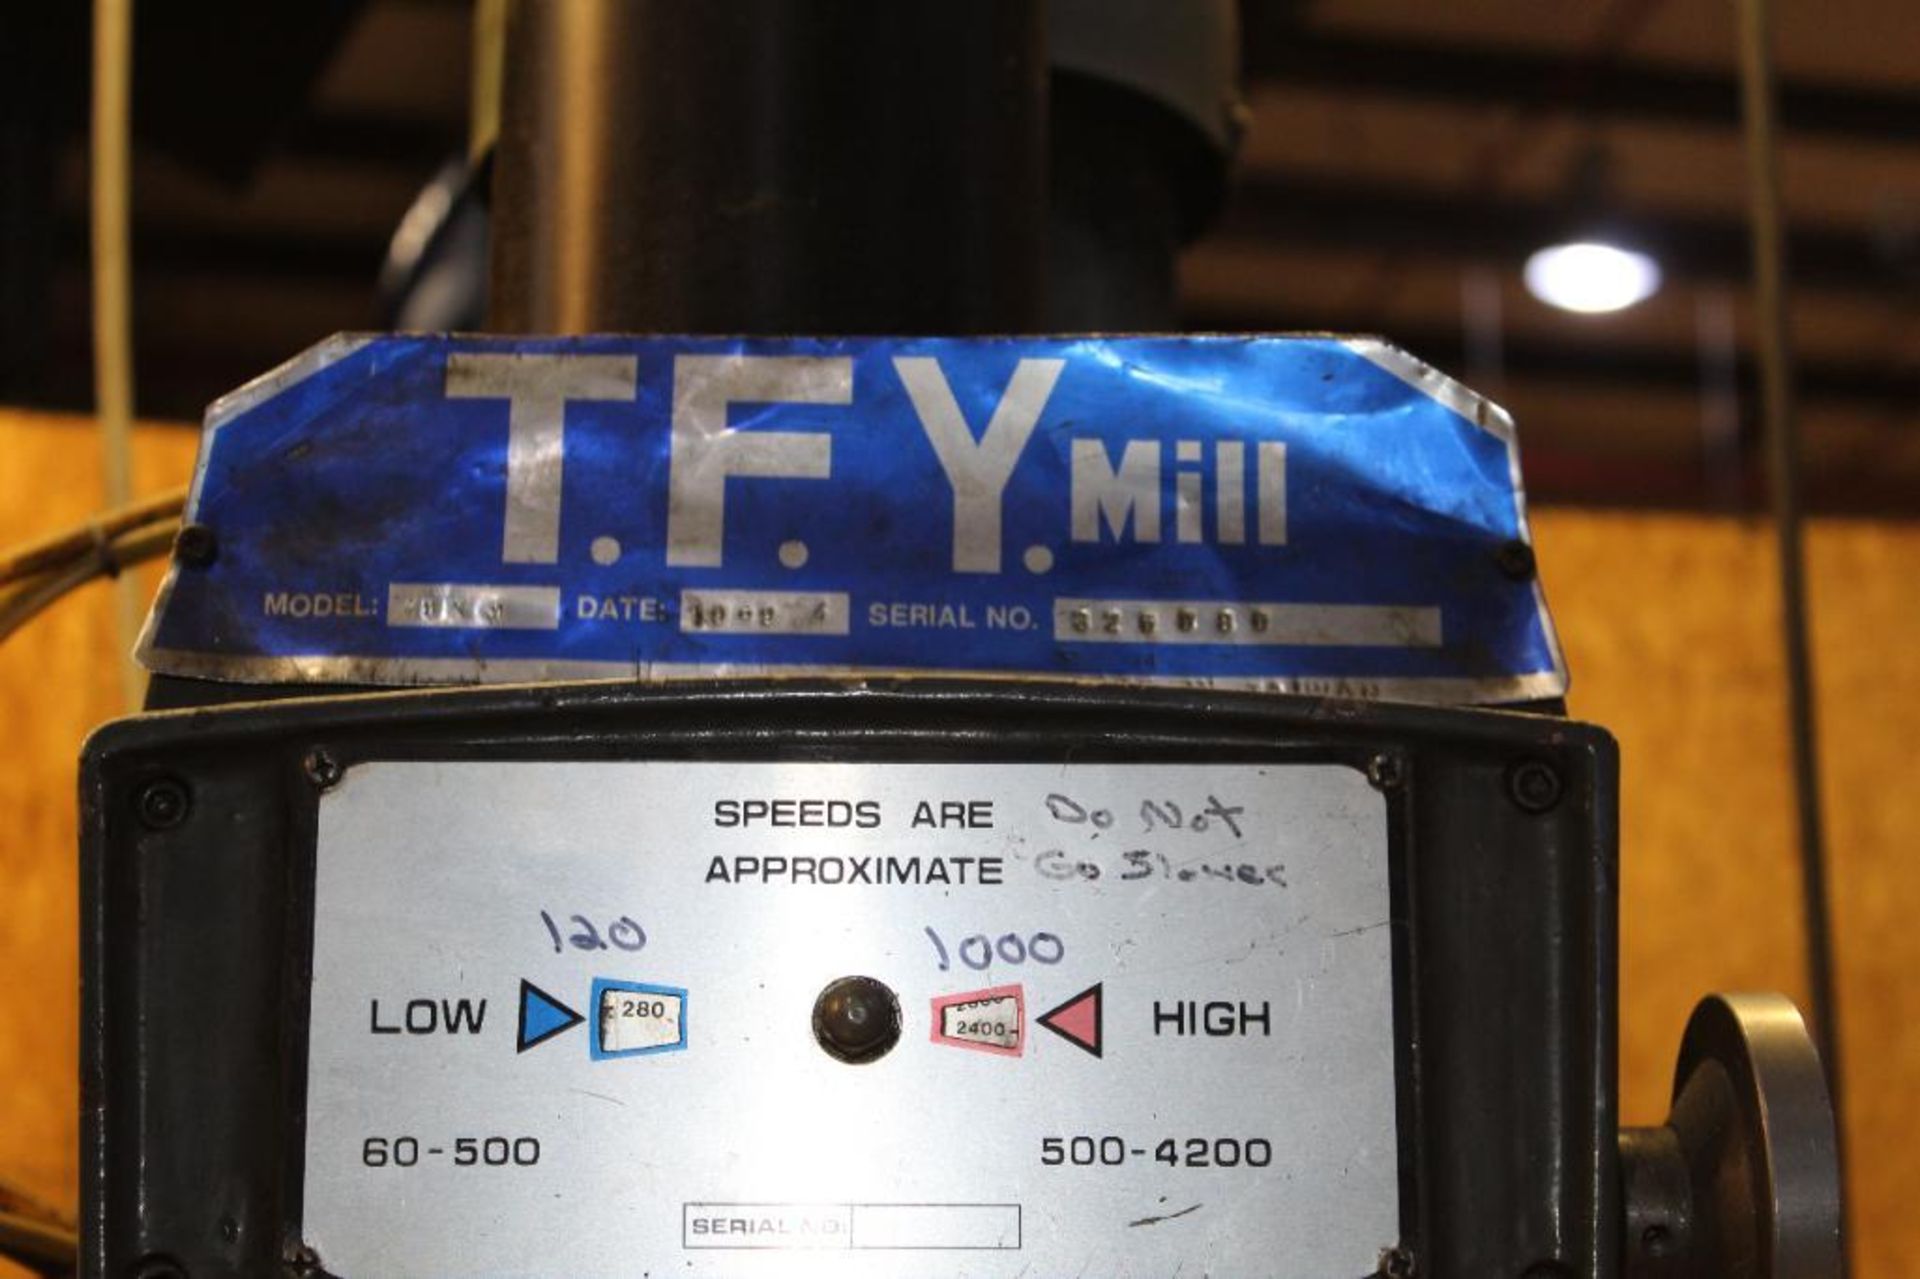 1988 T.F.Y. Lincoln Knee Mill Model 19X9 with 2-Axis Sorgon Digital Readout - Image 6 of 15